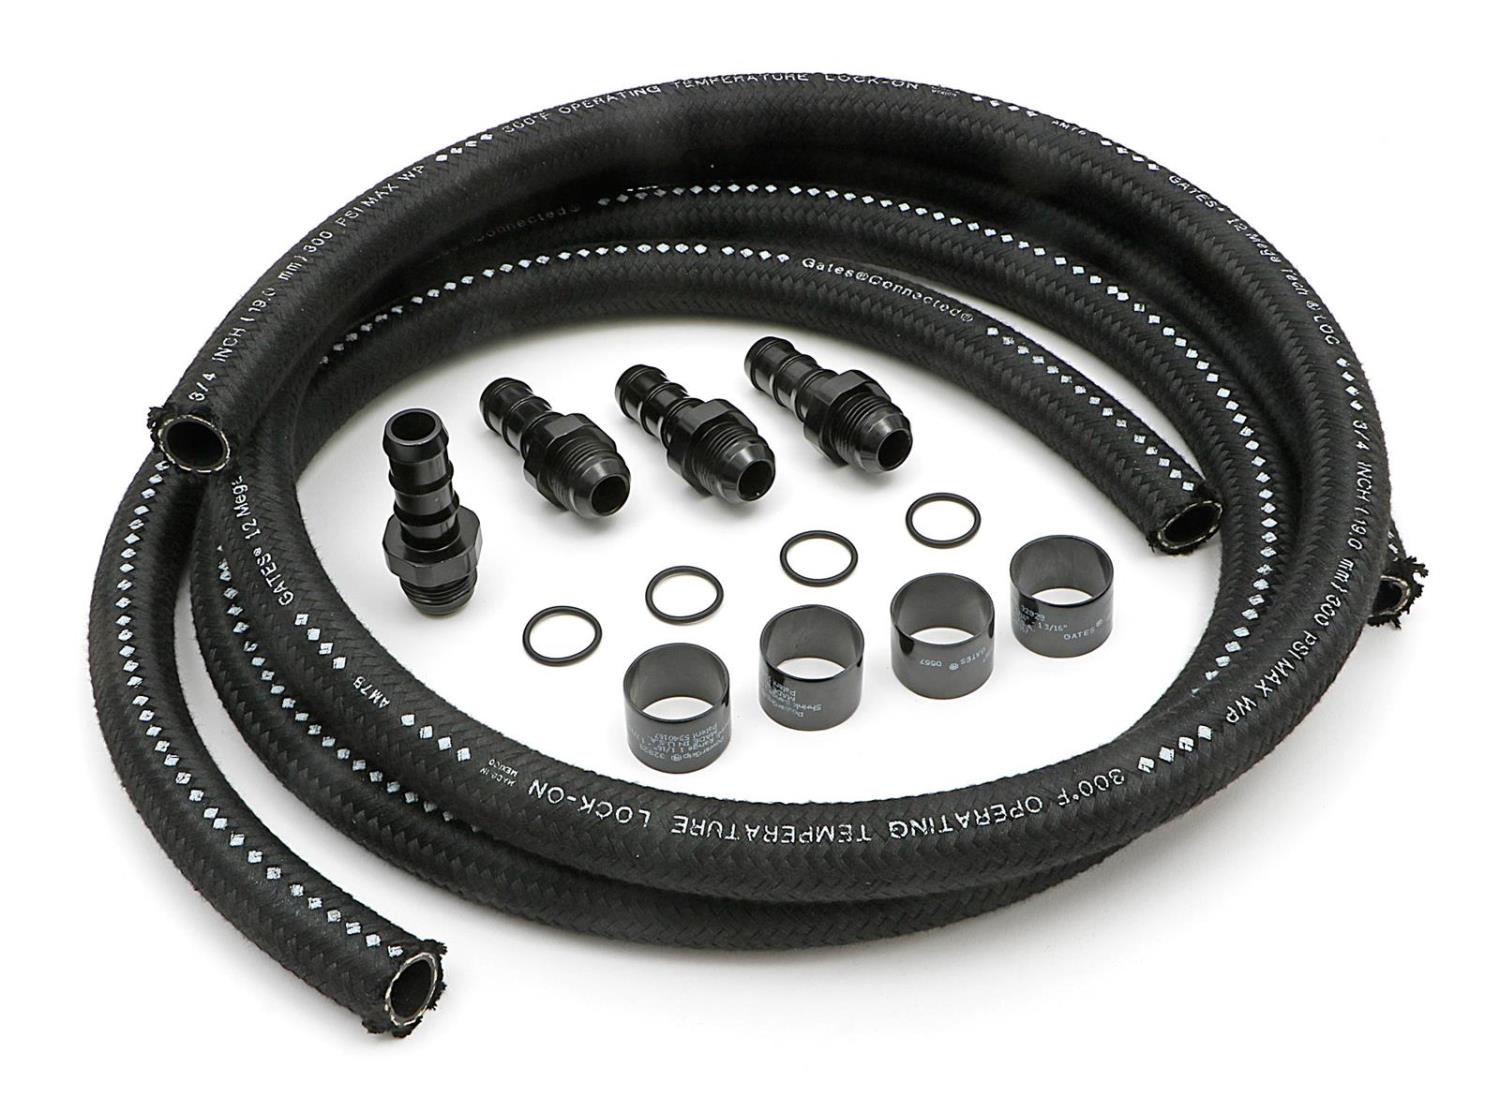 1008 72 in. Premium Oil Lines for Billet Oil Filtration Kits; -12AN Fittings